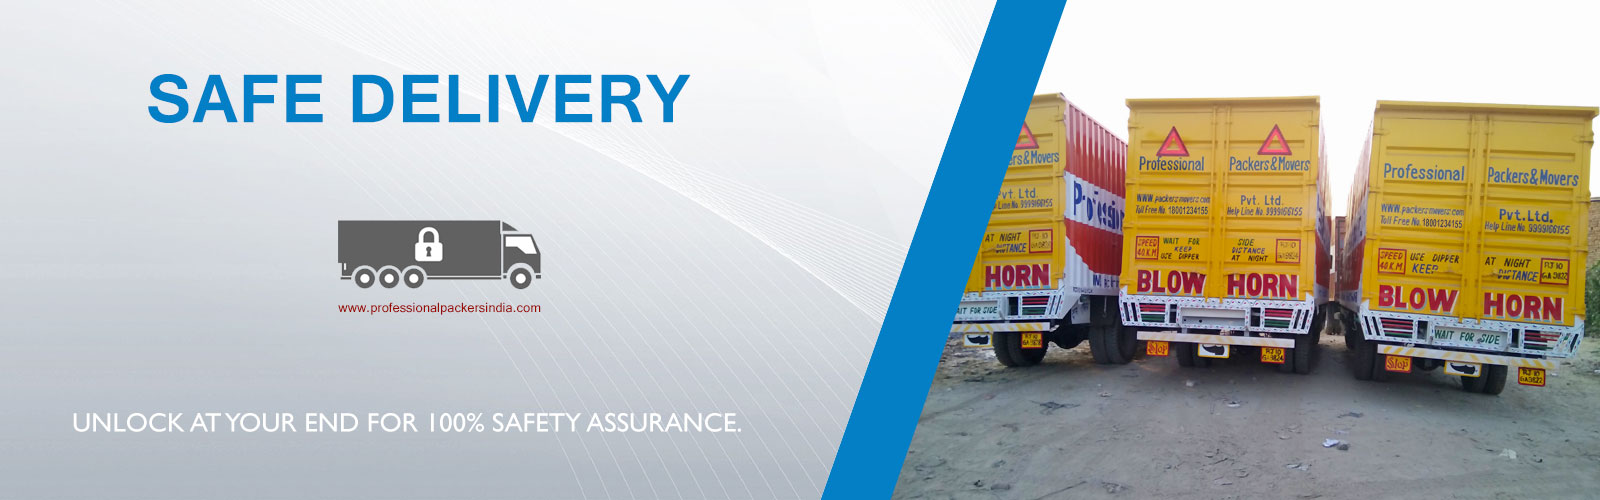 Movers Packers Sainik Farm Delhi company move your belongings fast and in an efficient manner by integrating top-notch packaging material, dedicated staff and global-class technology.